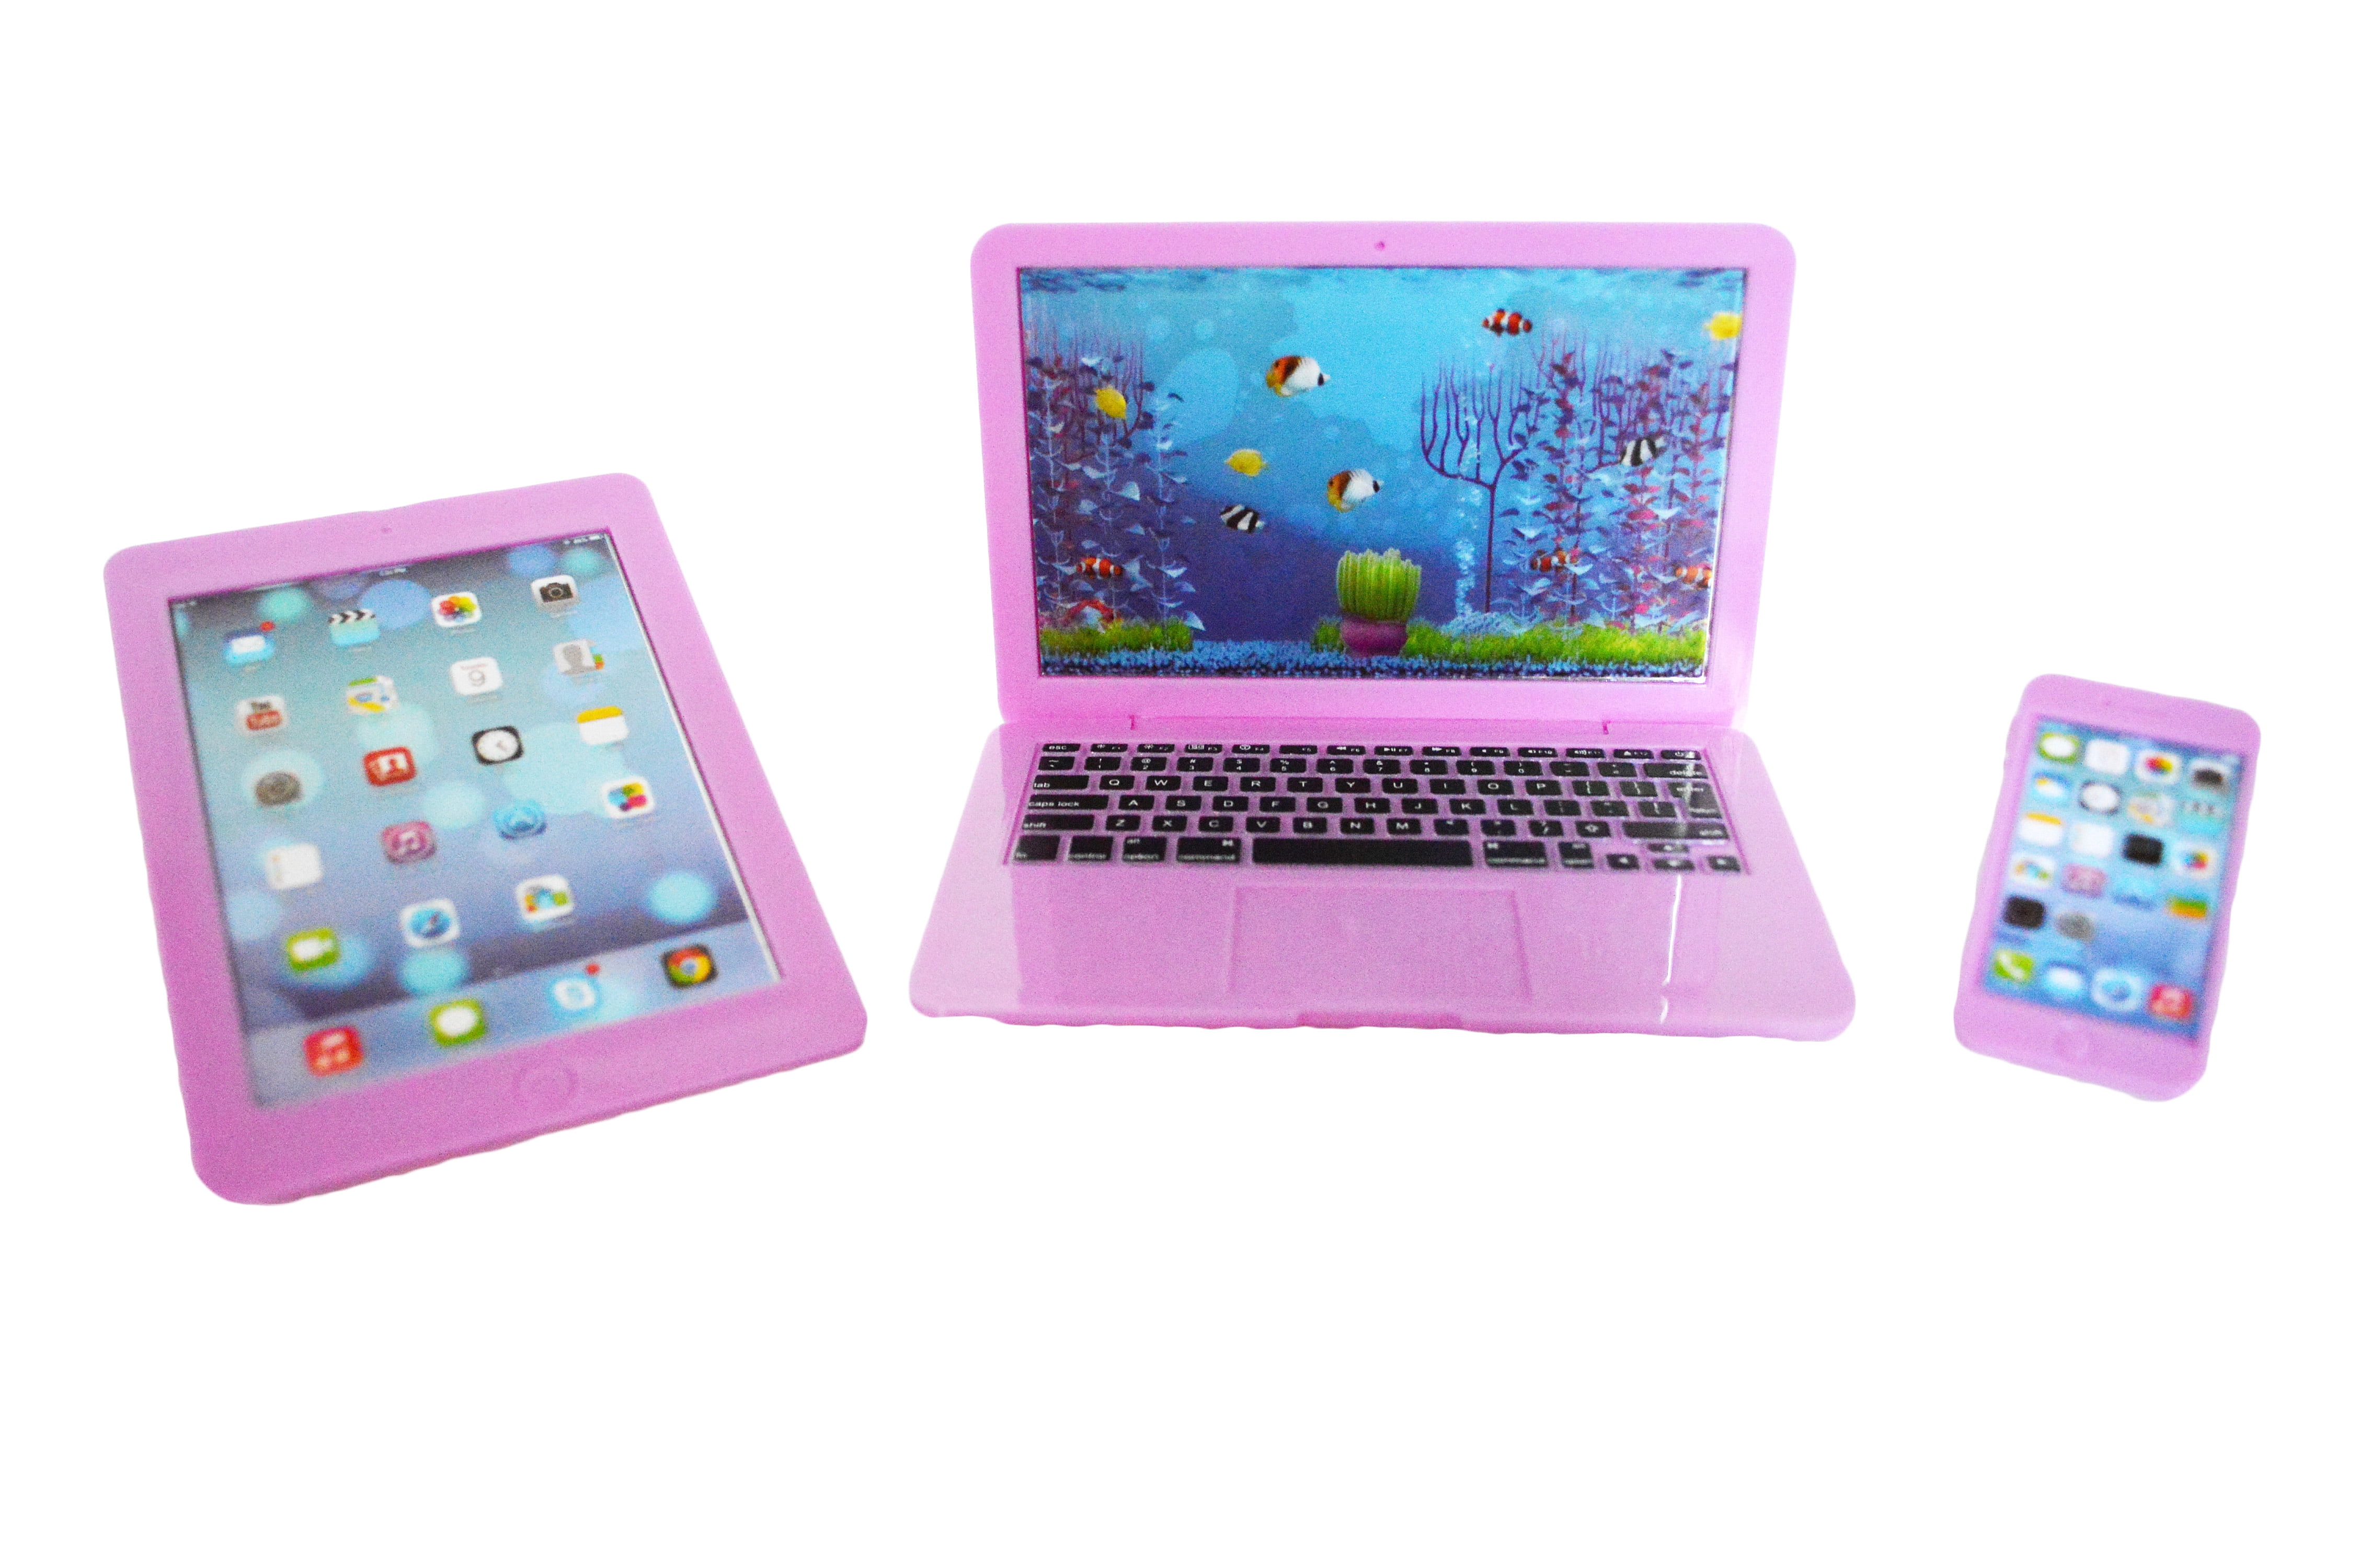 Buy My Brittanys Lavender Laptop Smart Phone And Tablet For American Girl Dolls And My Life As